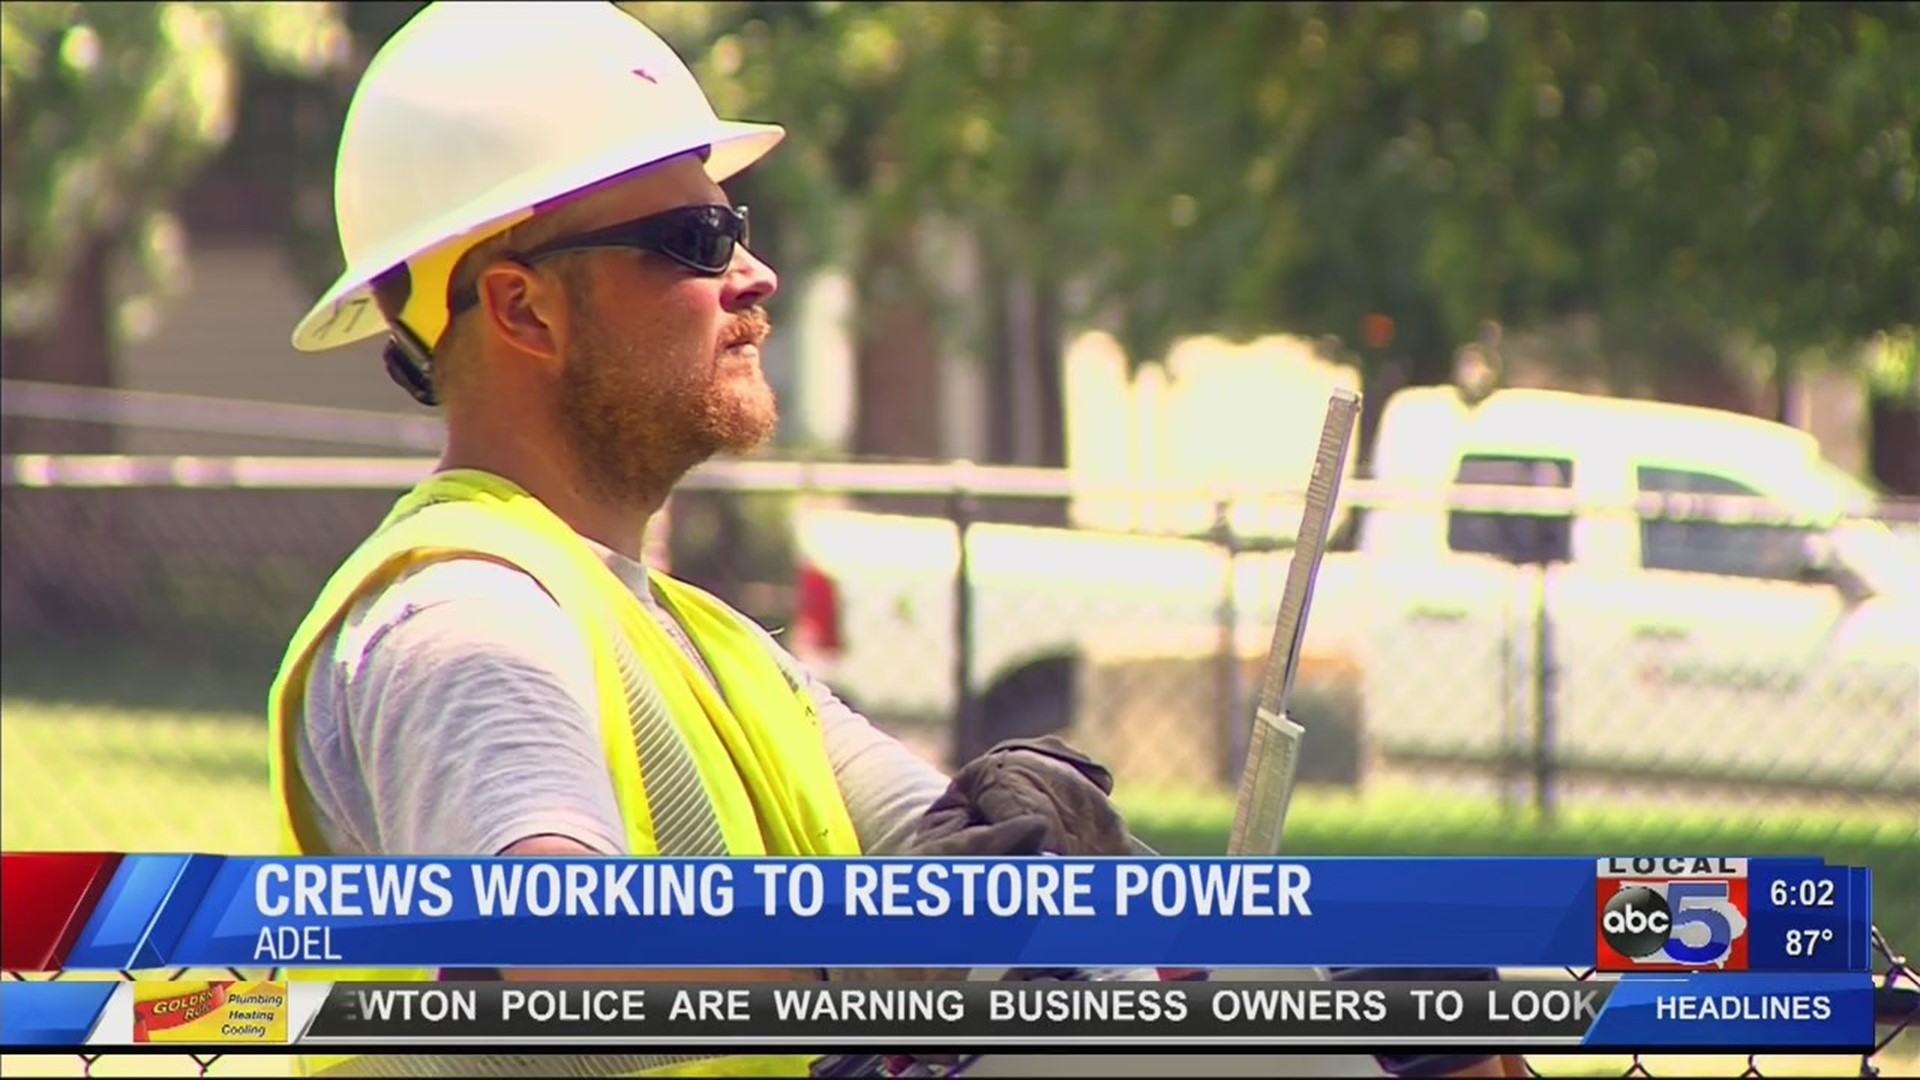 Crews from outside Des Moines working to help restore power after severe storms